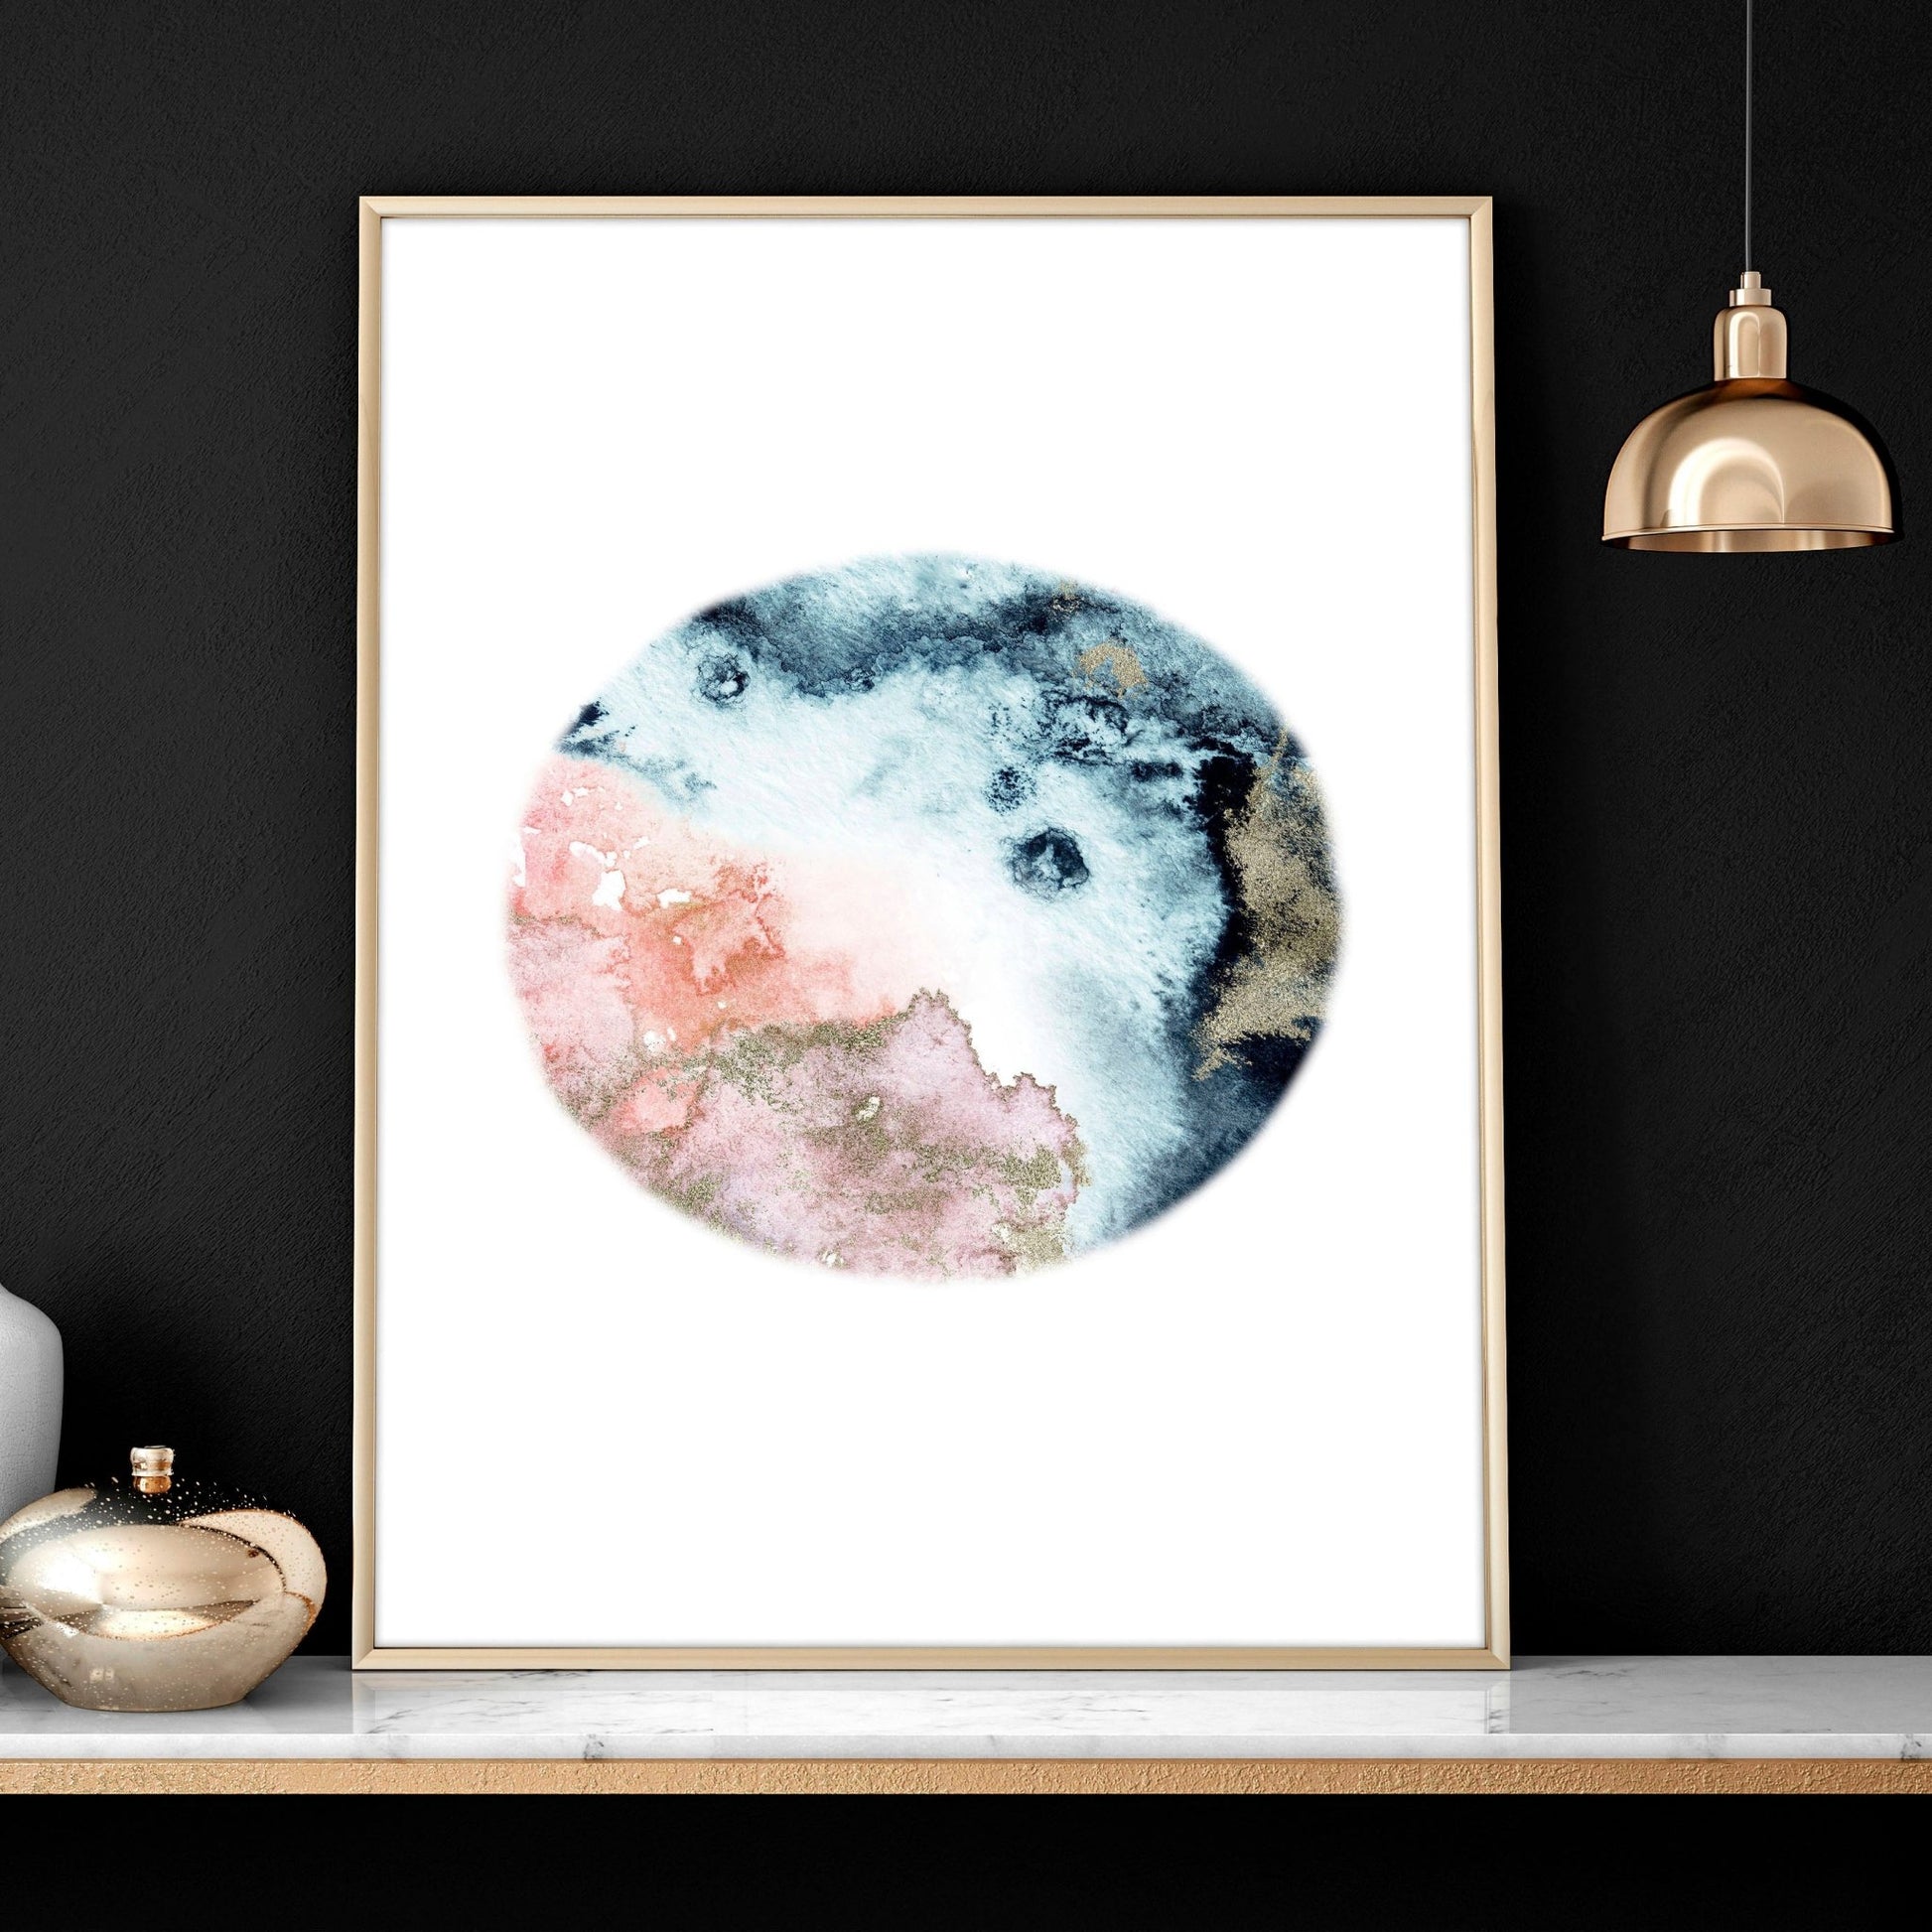 Moon wall art for living room | set of 3 wall art prints - About Wall Art